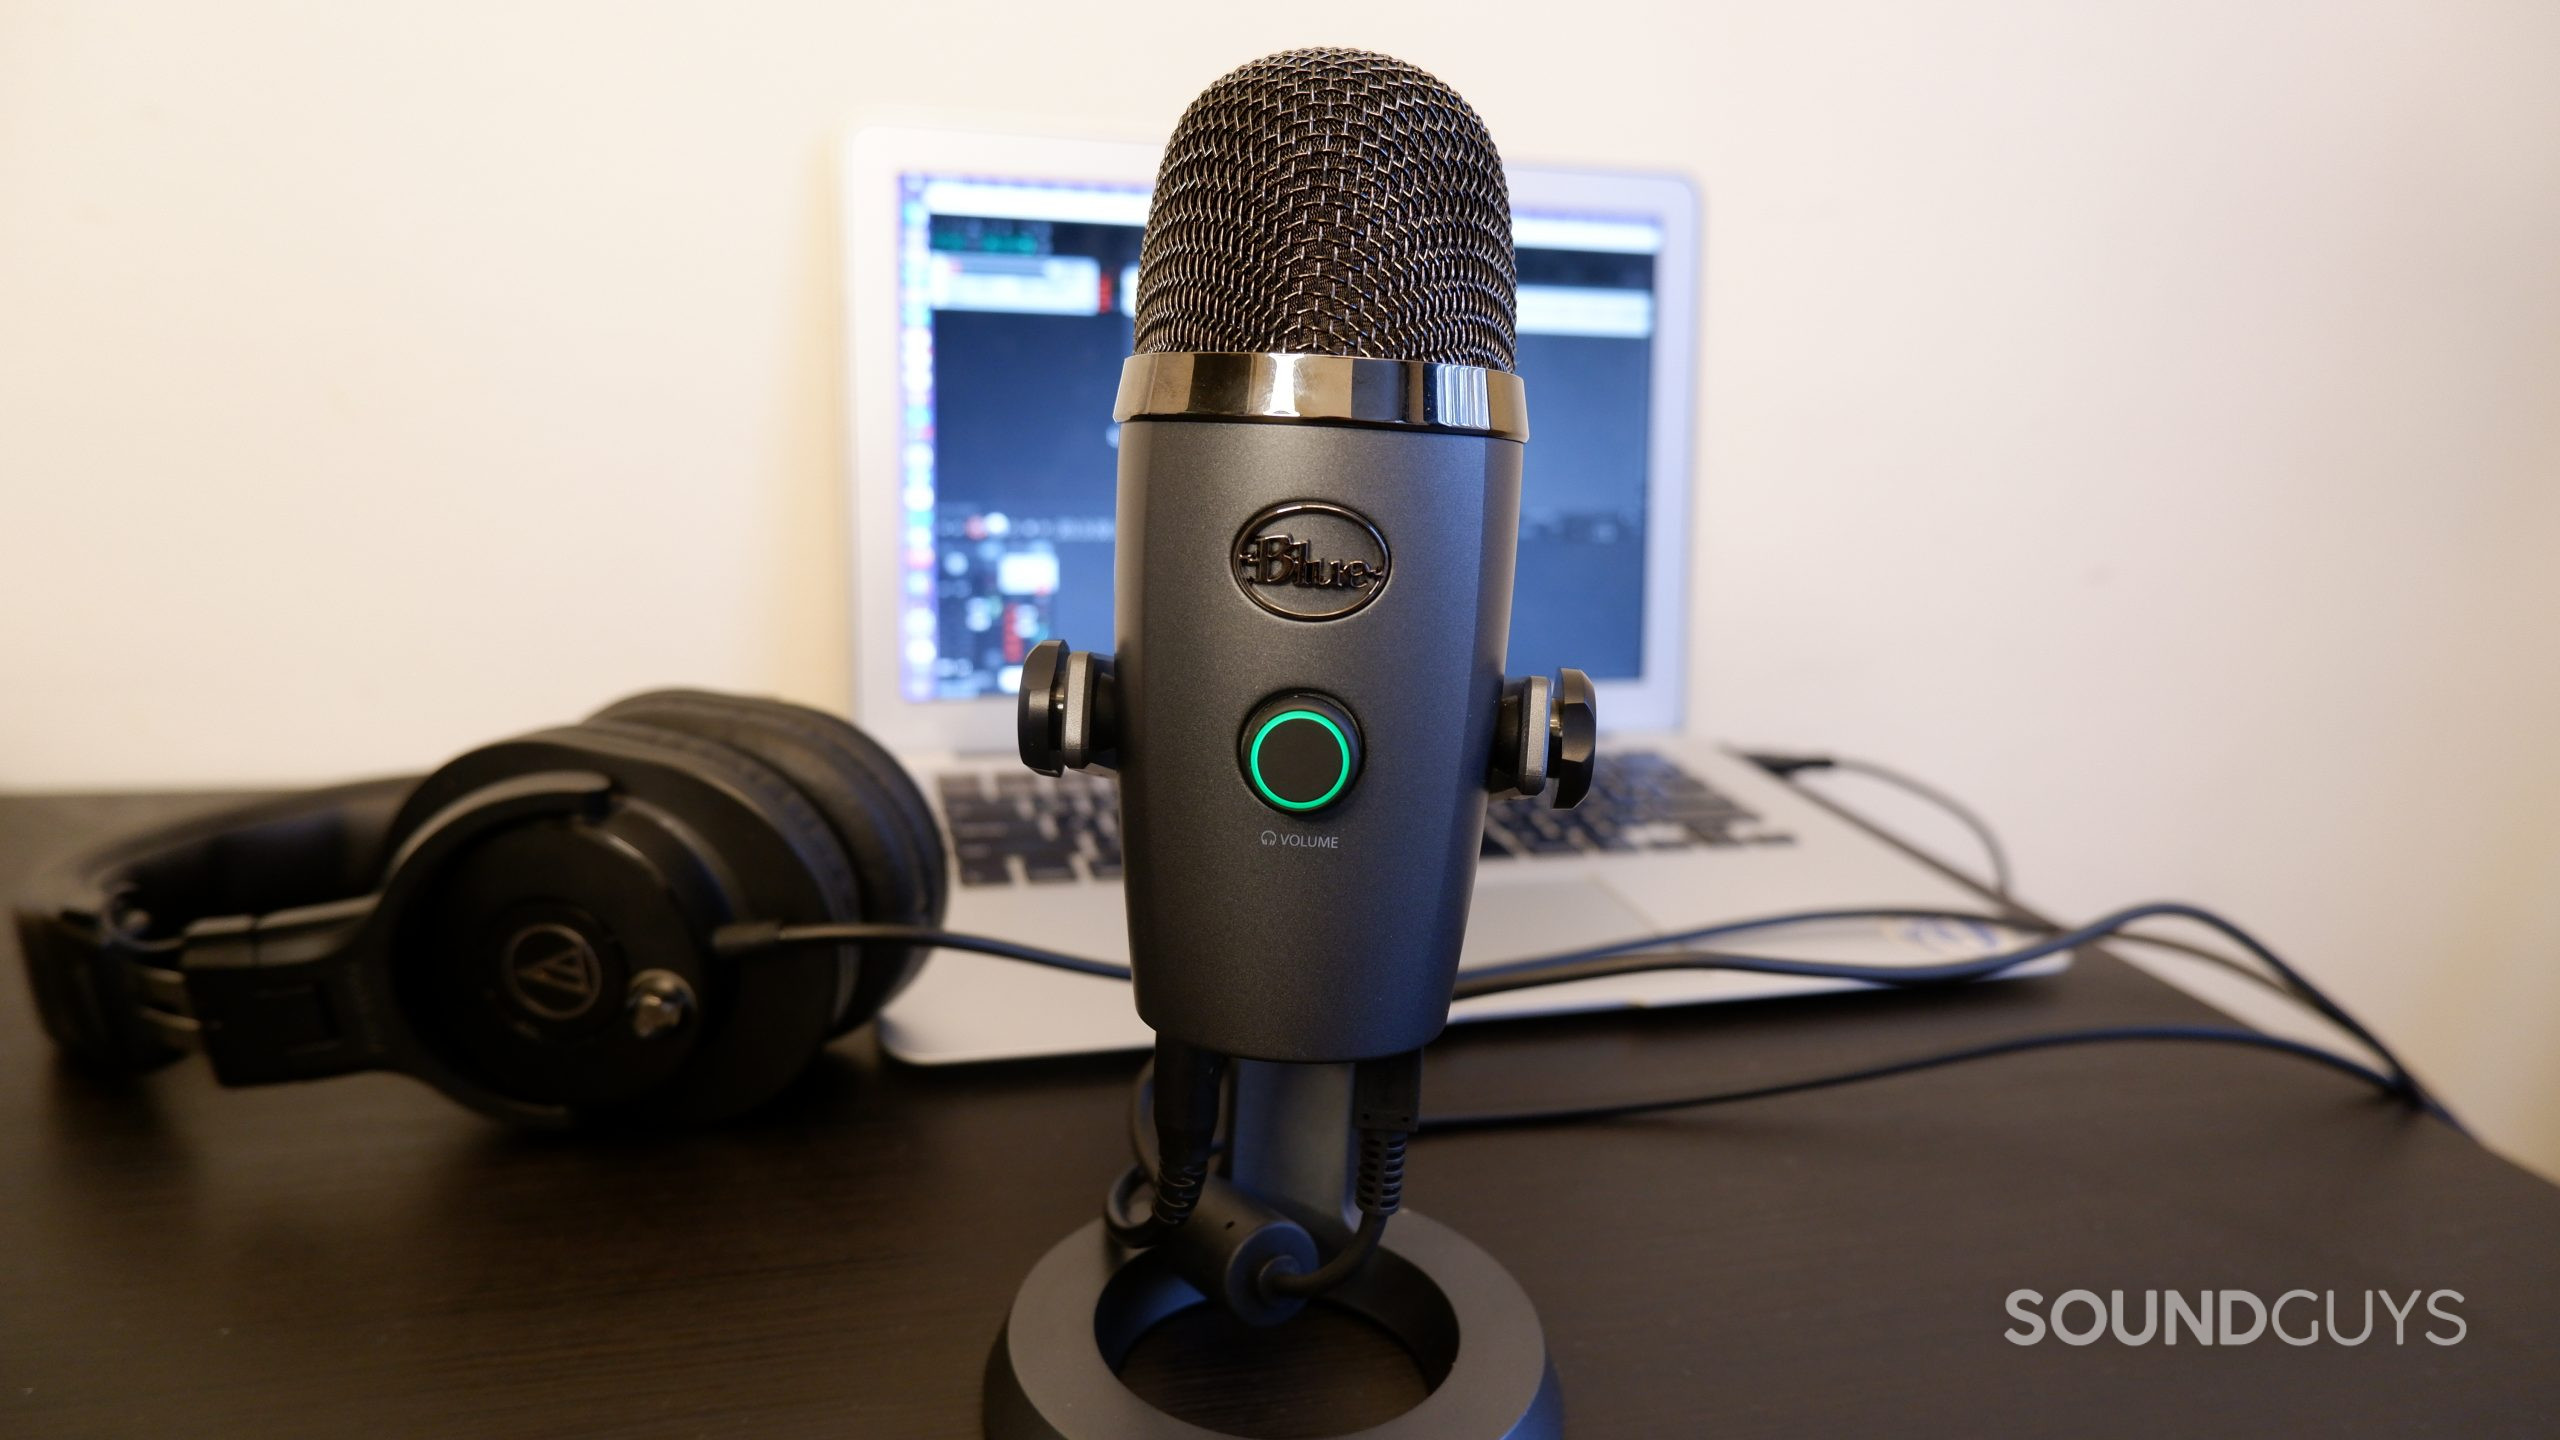 The Blue Yeti Nano sitting on a black table in front of a laptop and headphones